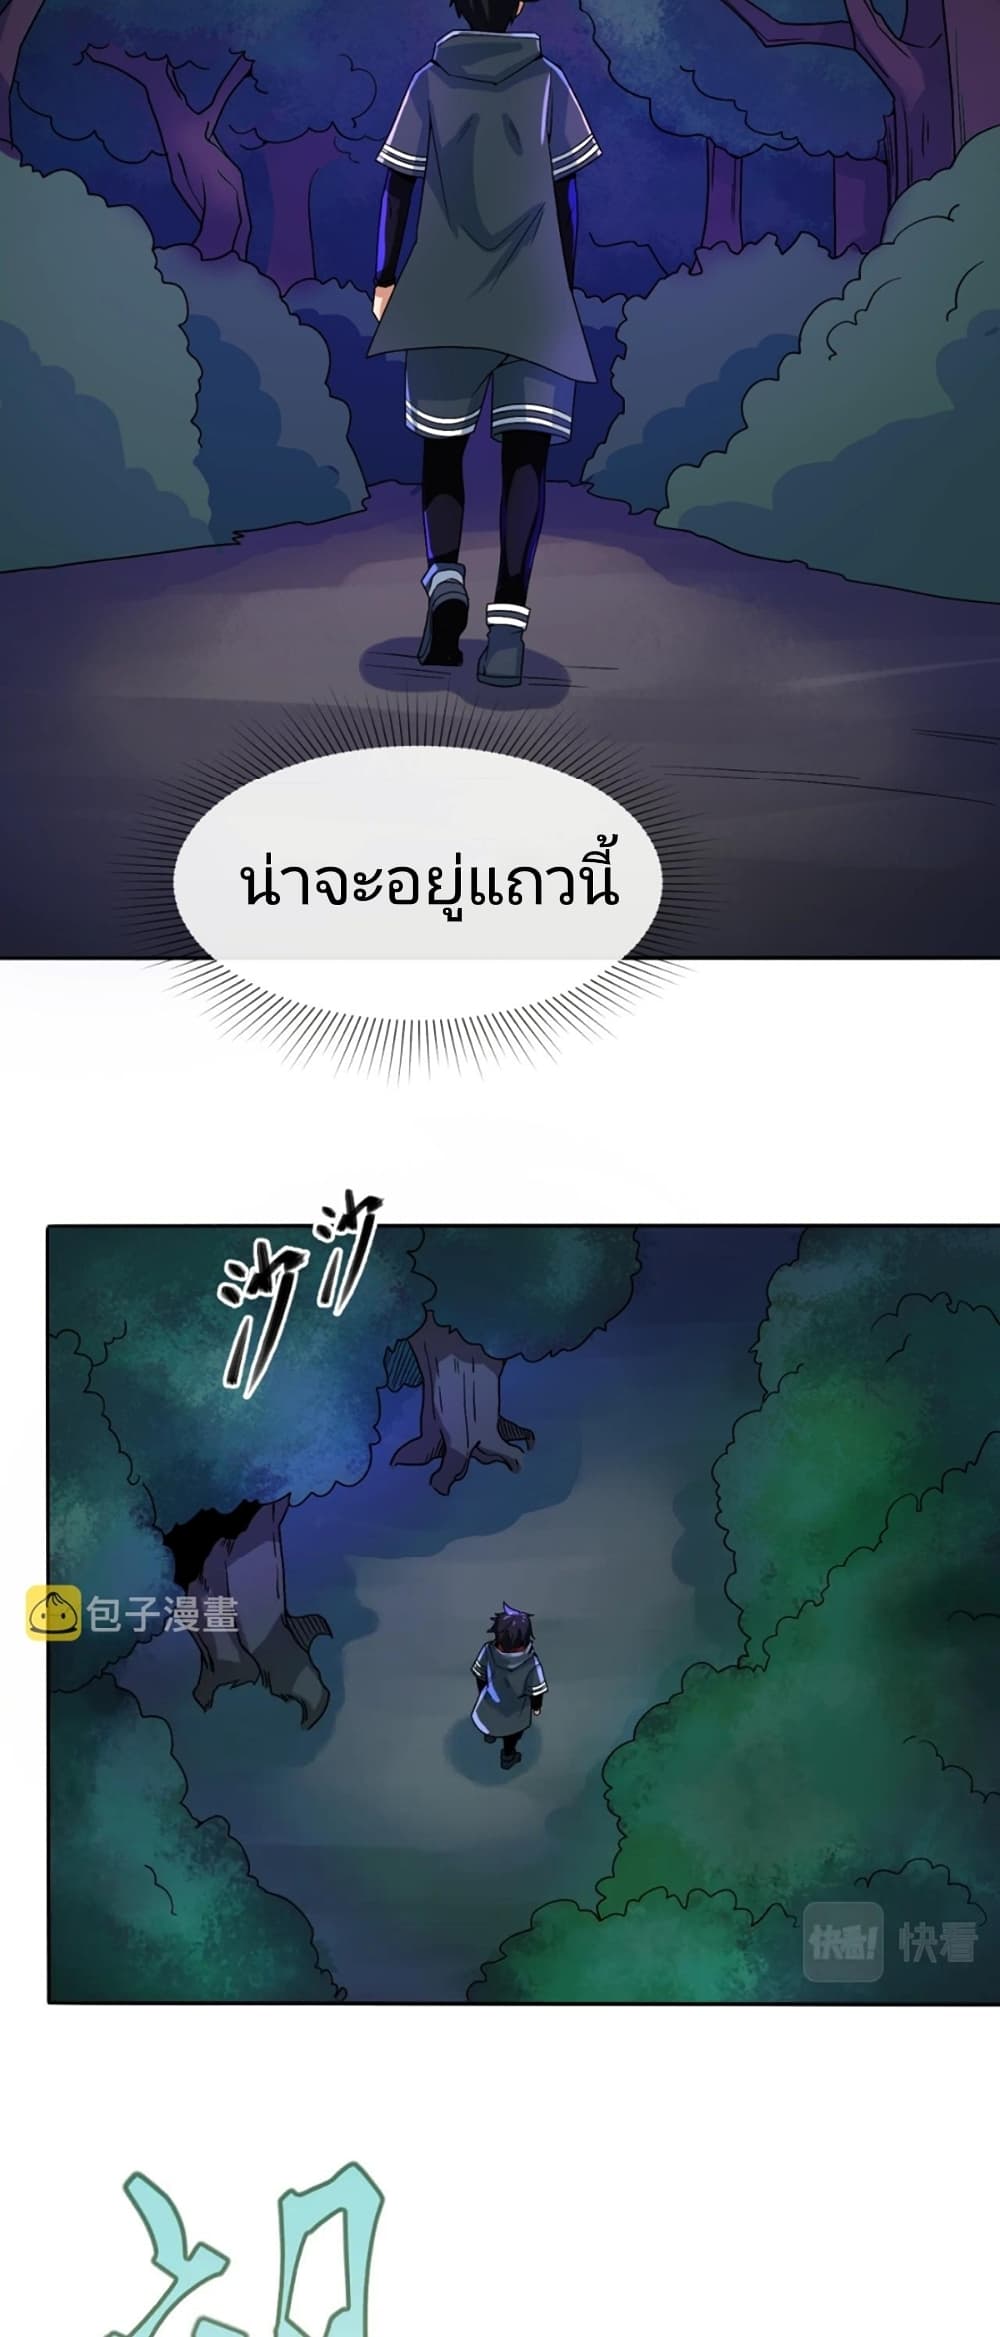 The Age of Ghost Spirits à¸à¸­à¸à¸à¸µà¹ 8 (31)